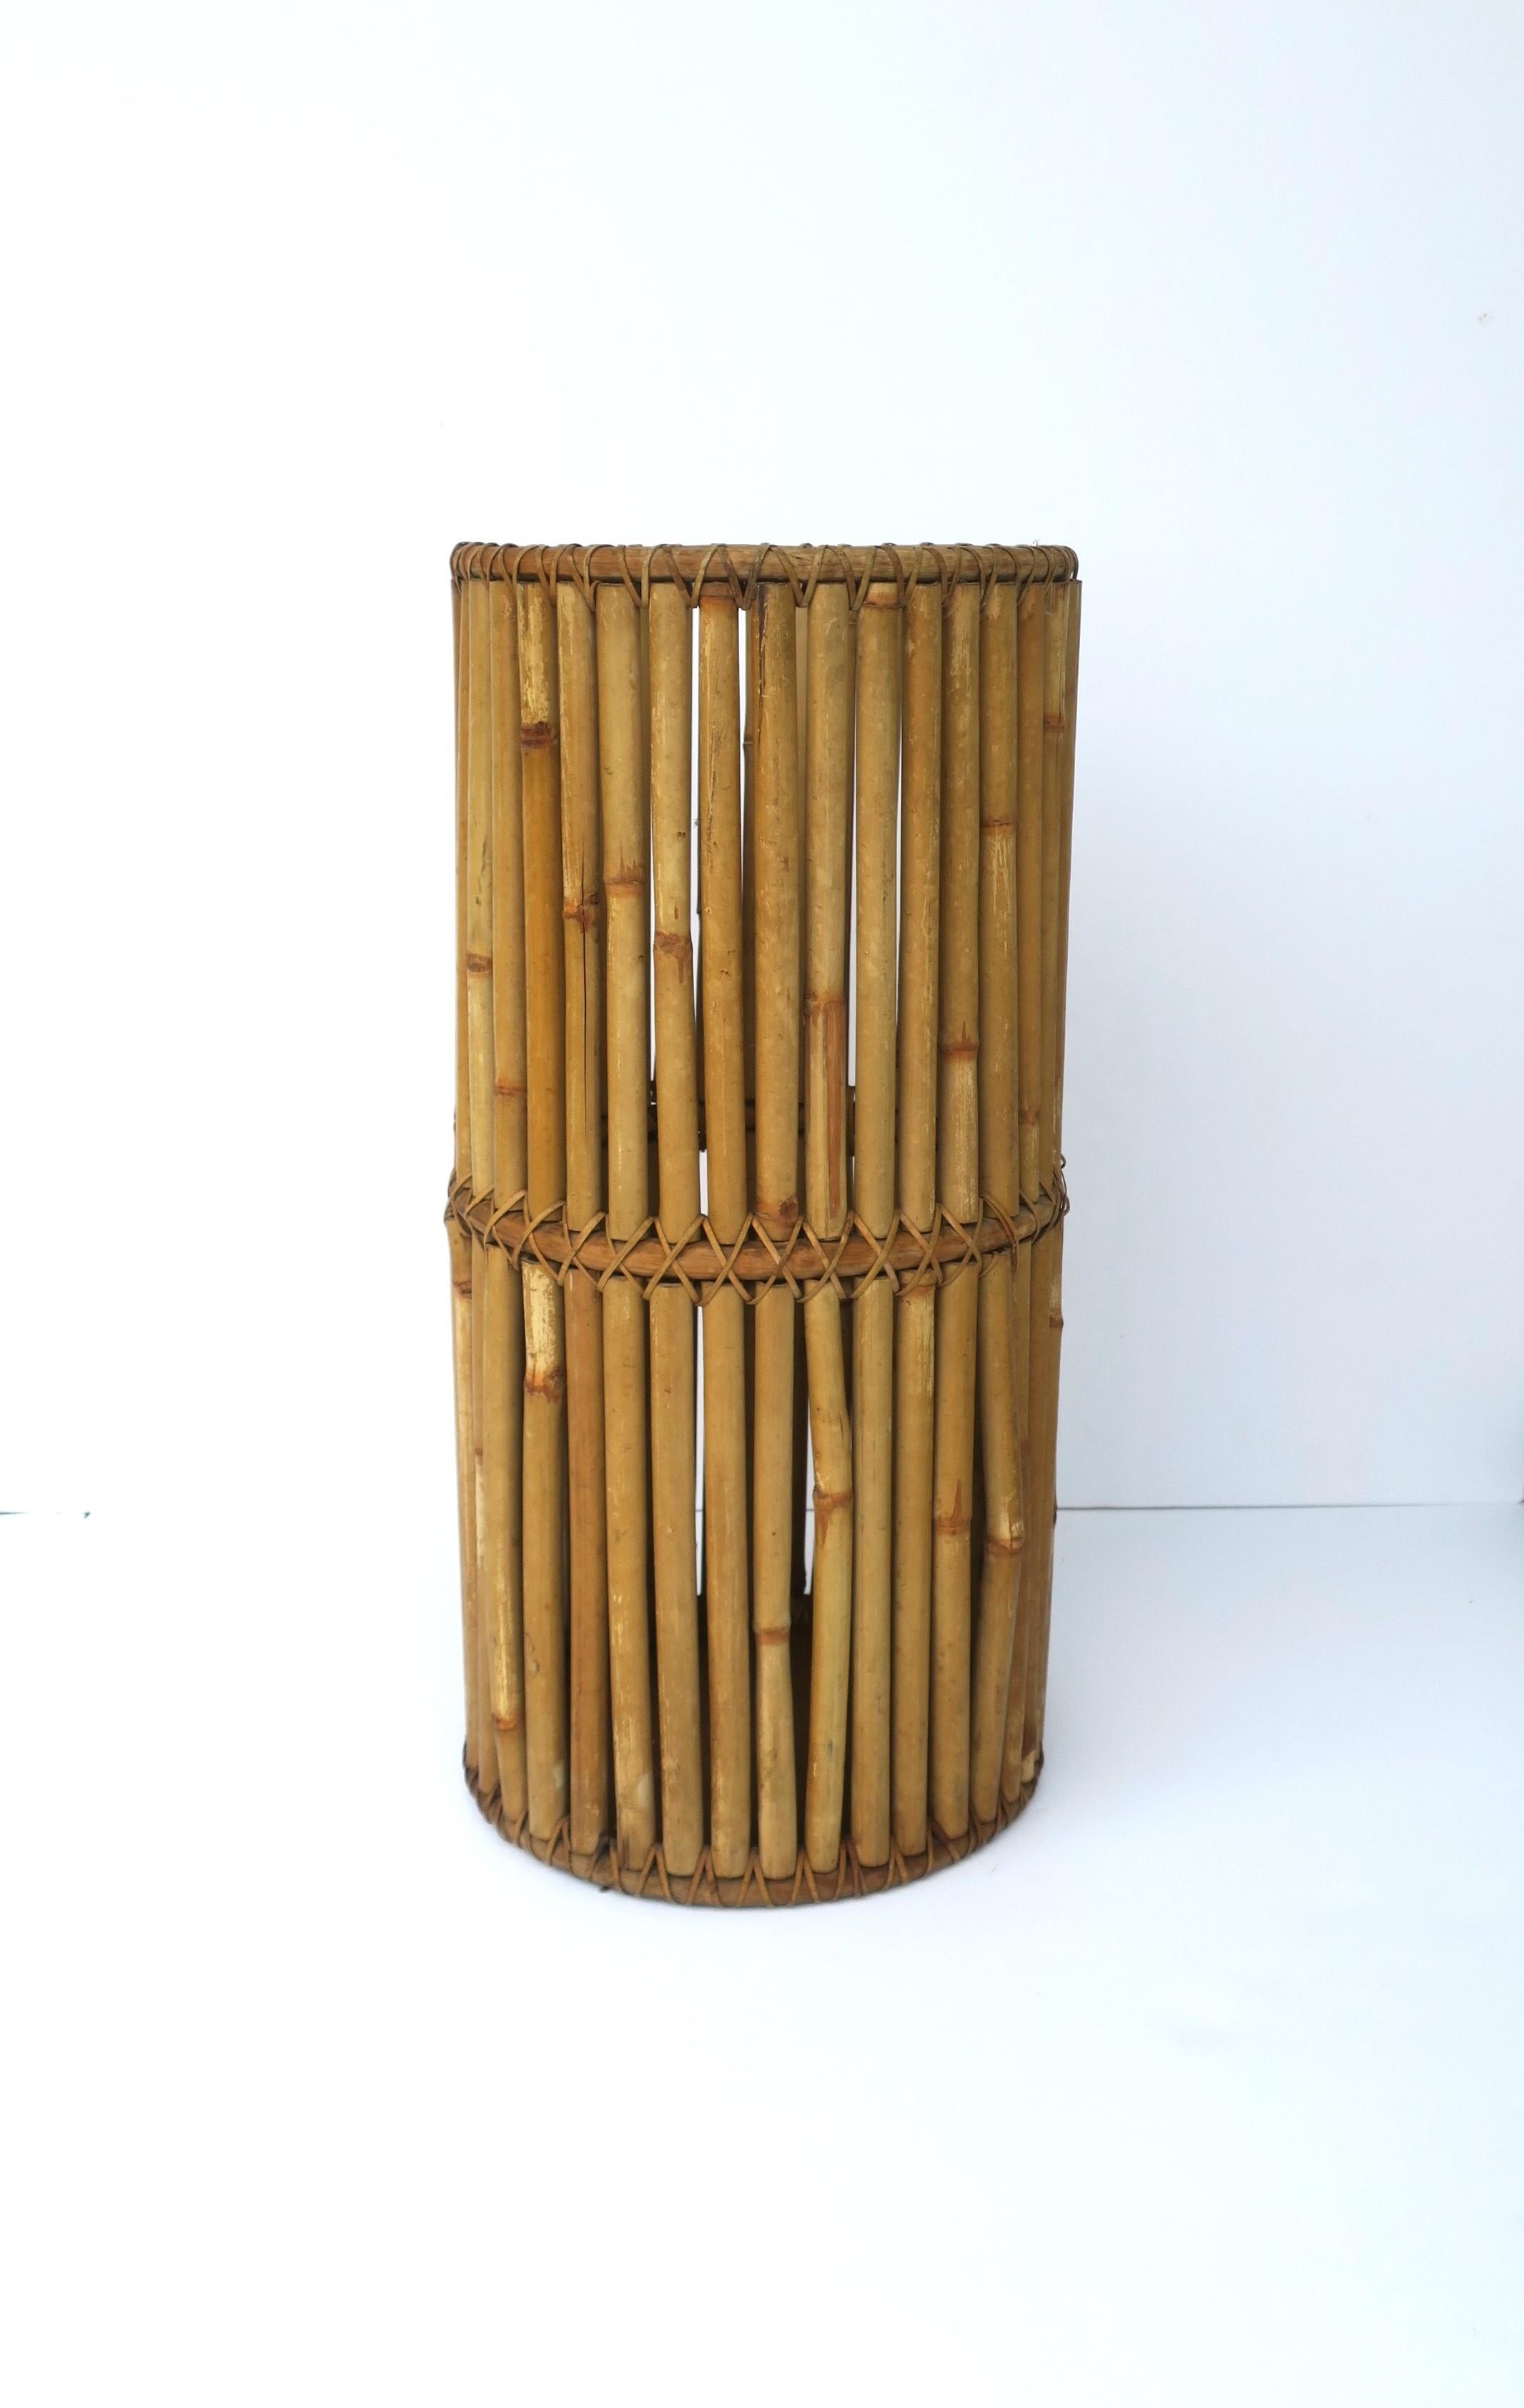 A wicker wrapped bamboo umbrella holder stand, circa mid-20th century. 

Dimensions: 10